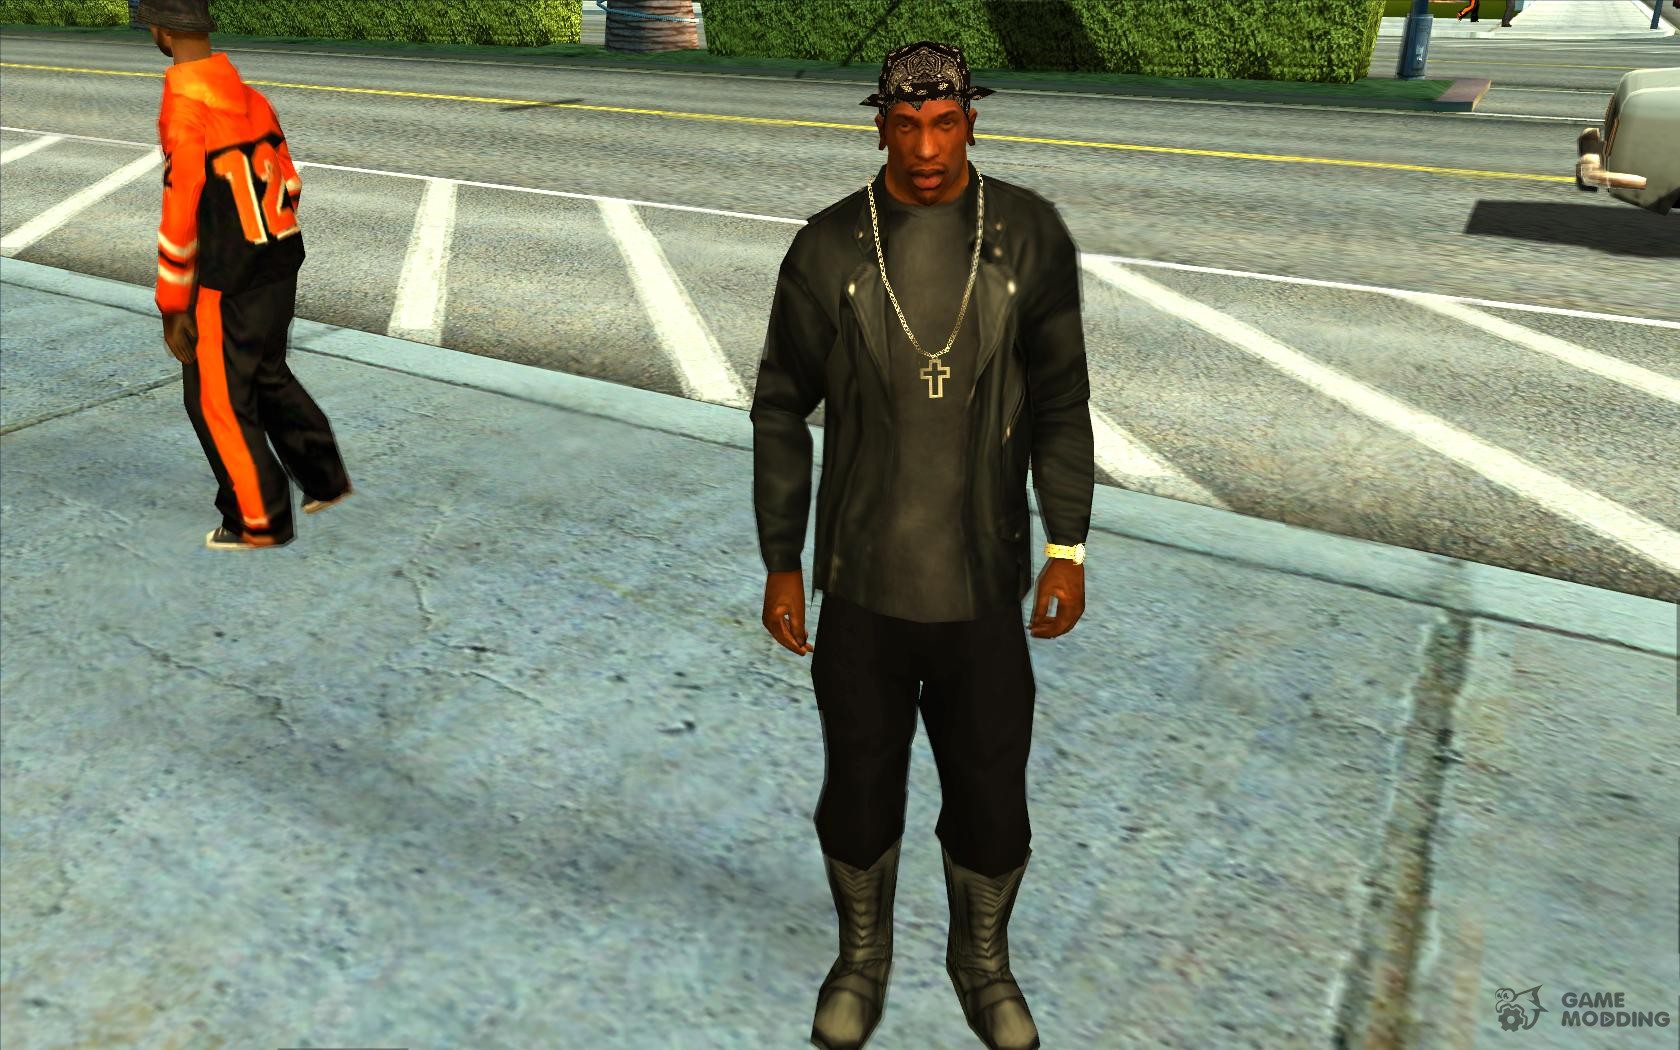 Jacket without a picture from behind for GTA San Andreas.